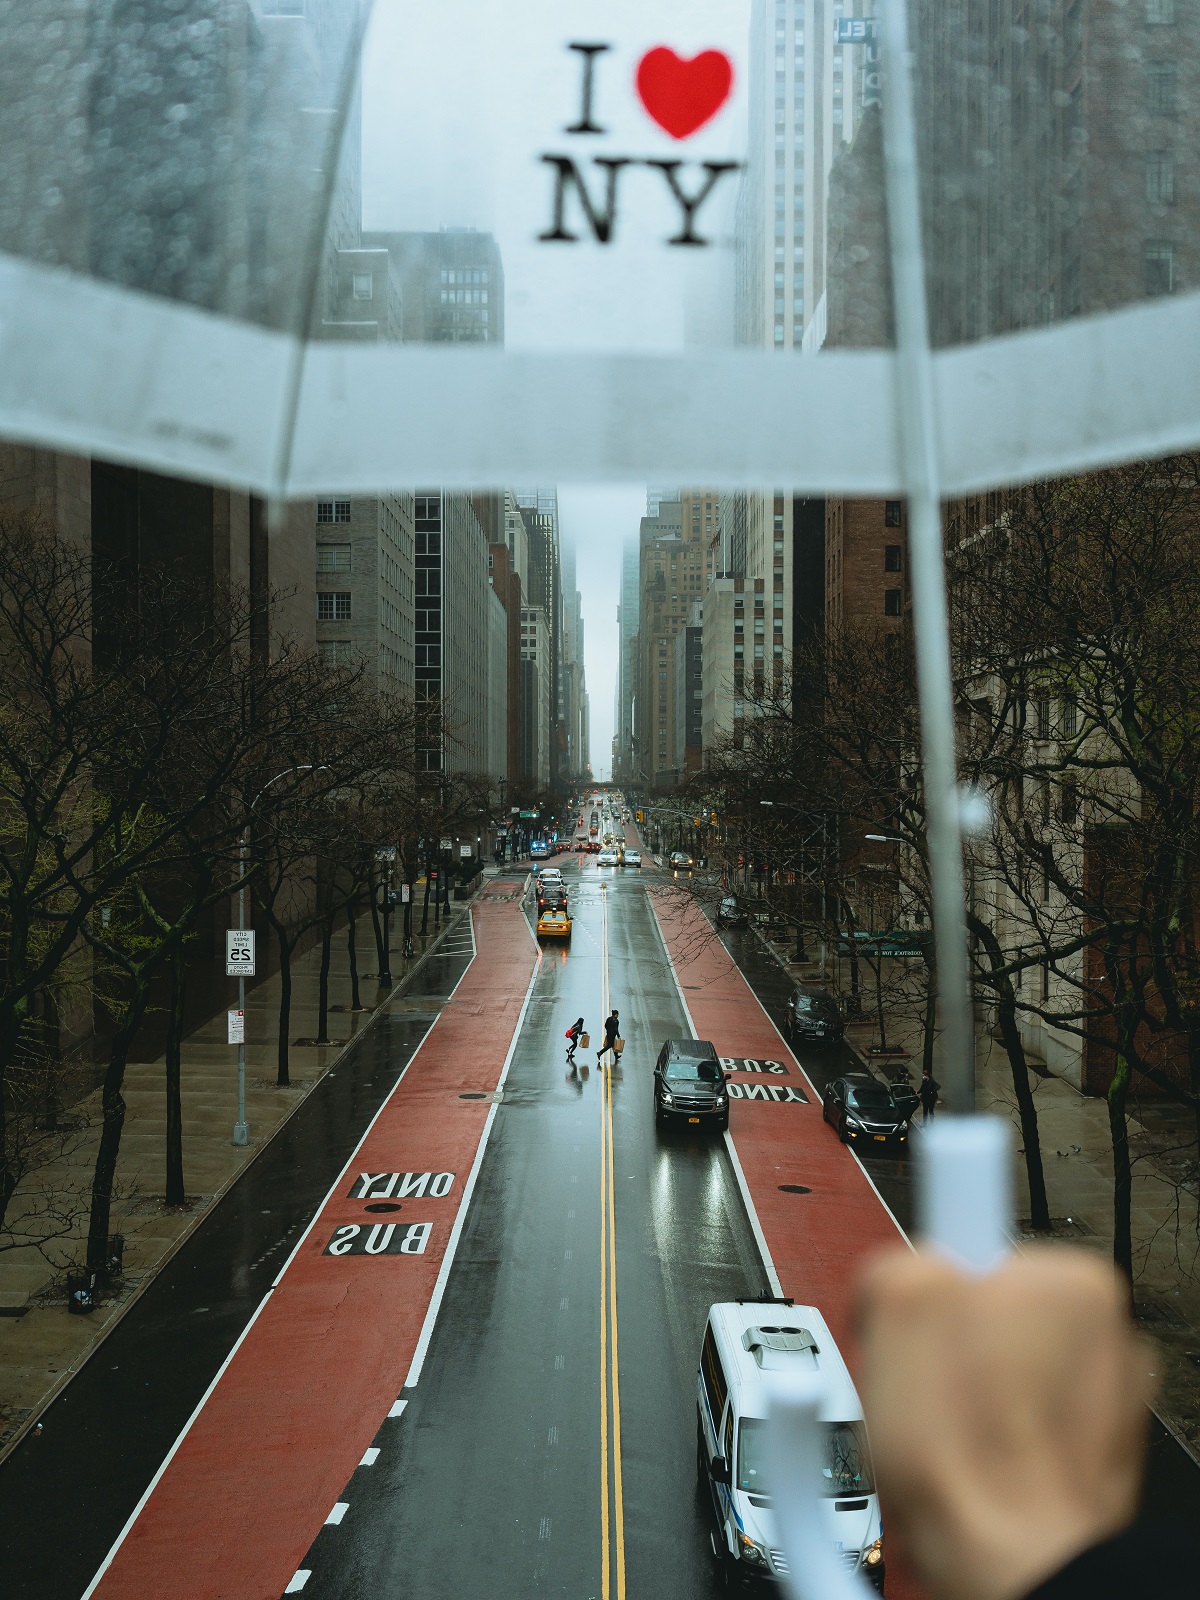 Person holds up a clear umbrella that says "I love NY" above a rainy urban landscape